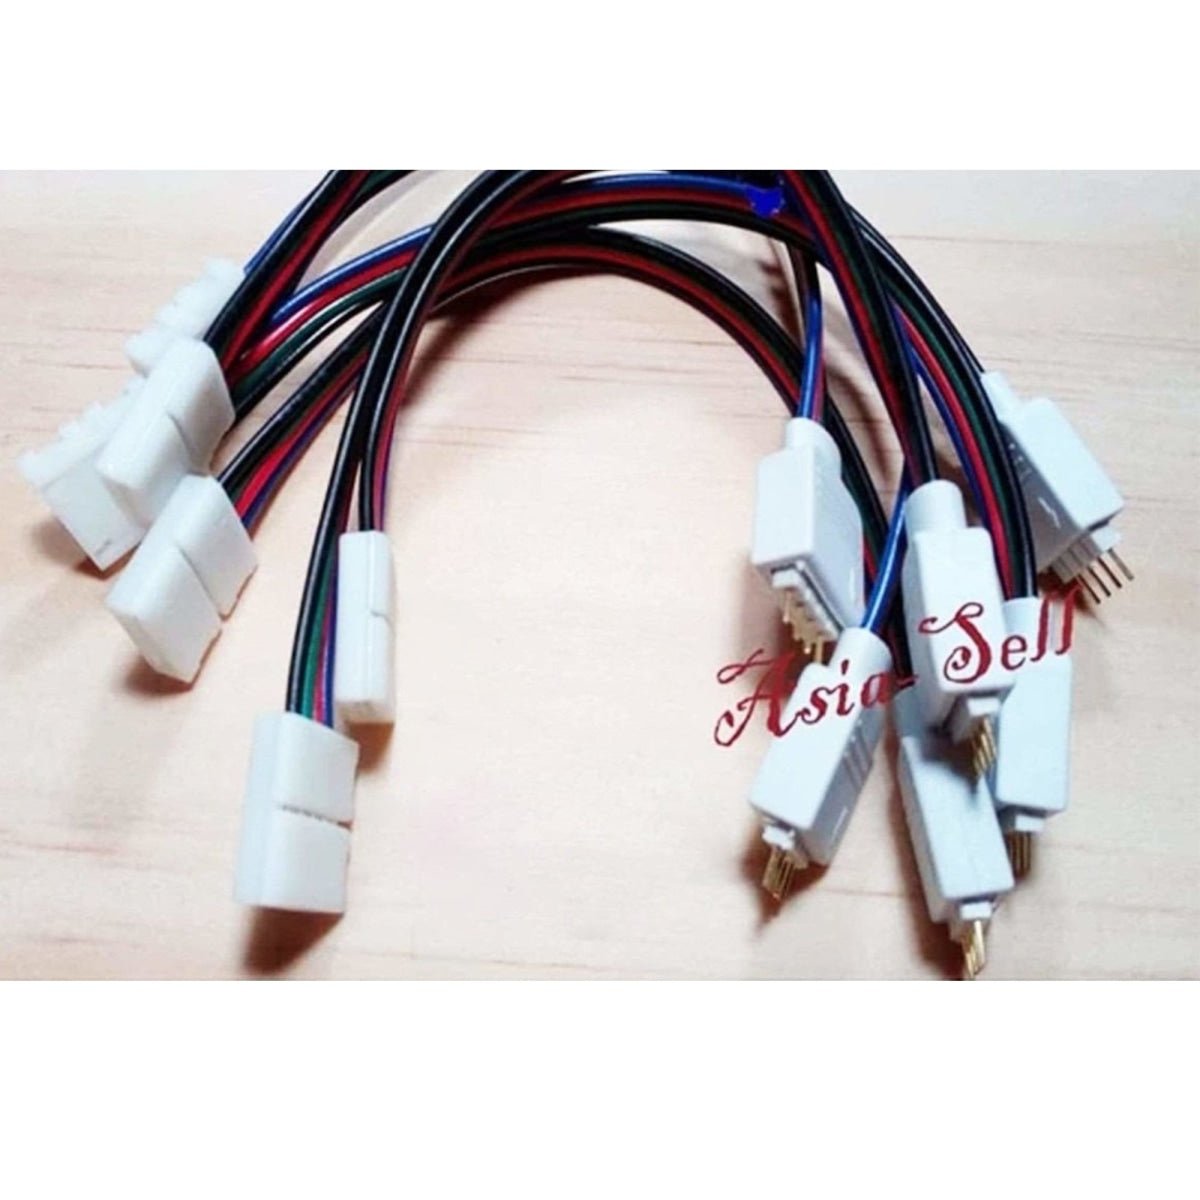 1pcs 10mm RGB Male/Female Interchangeable to Clip Joiner LED Strip Connector 10cm - Asia Sell